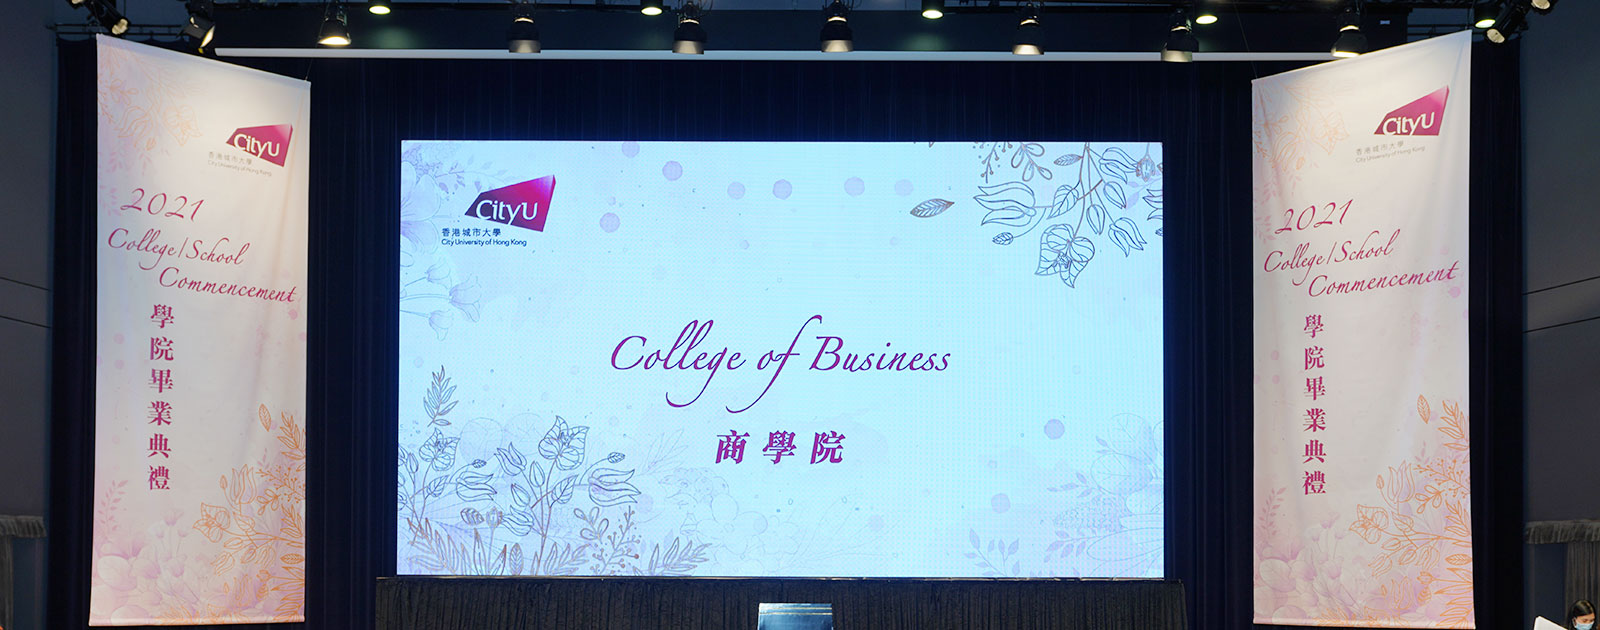 College of Business hosts Commencement for 2021 graduates